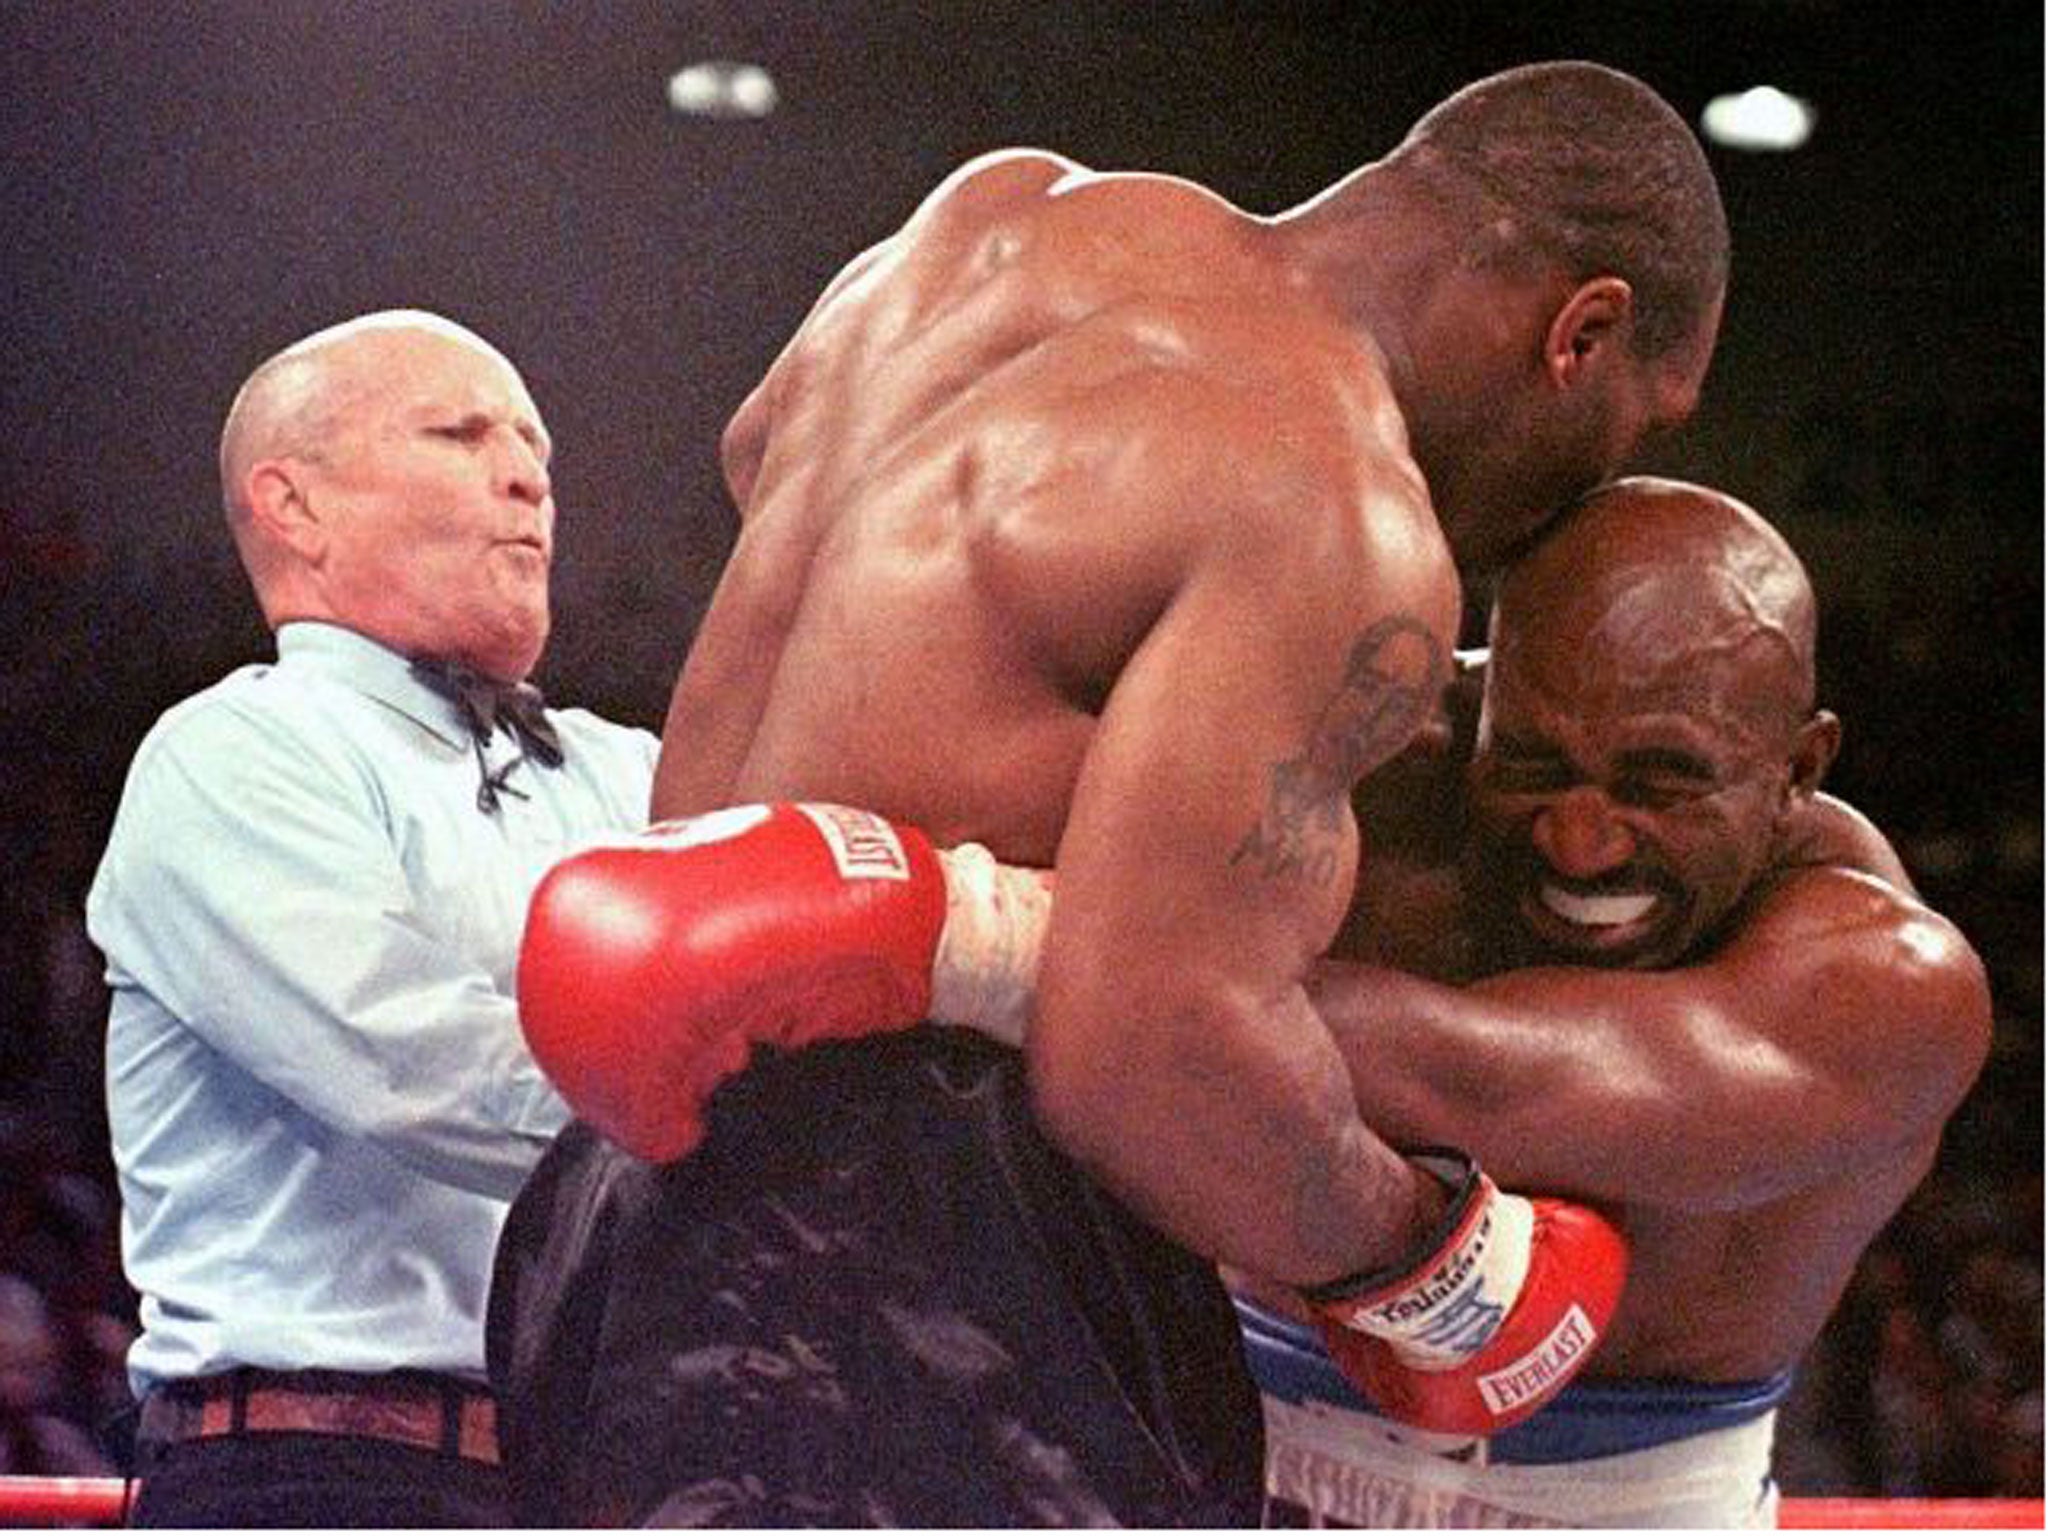 The referee Mills Lane intervenes after Mike Tyson bit Evander Holyfield (right) during their infamous encounter in June 1997